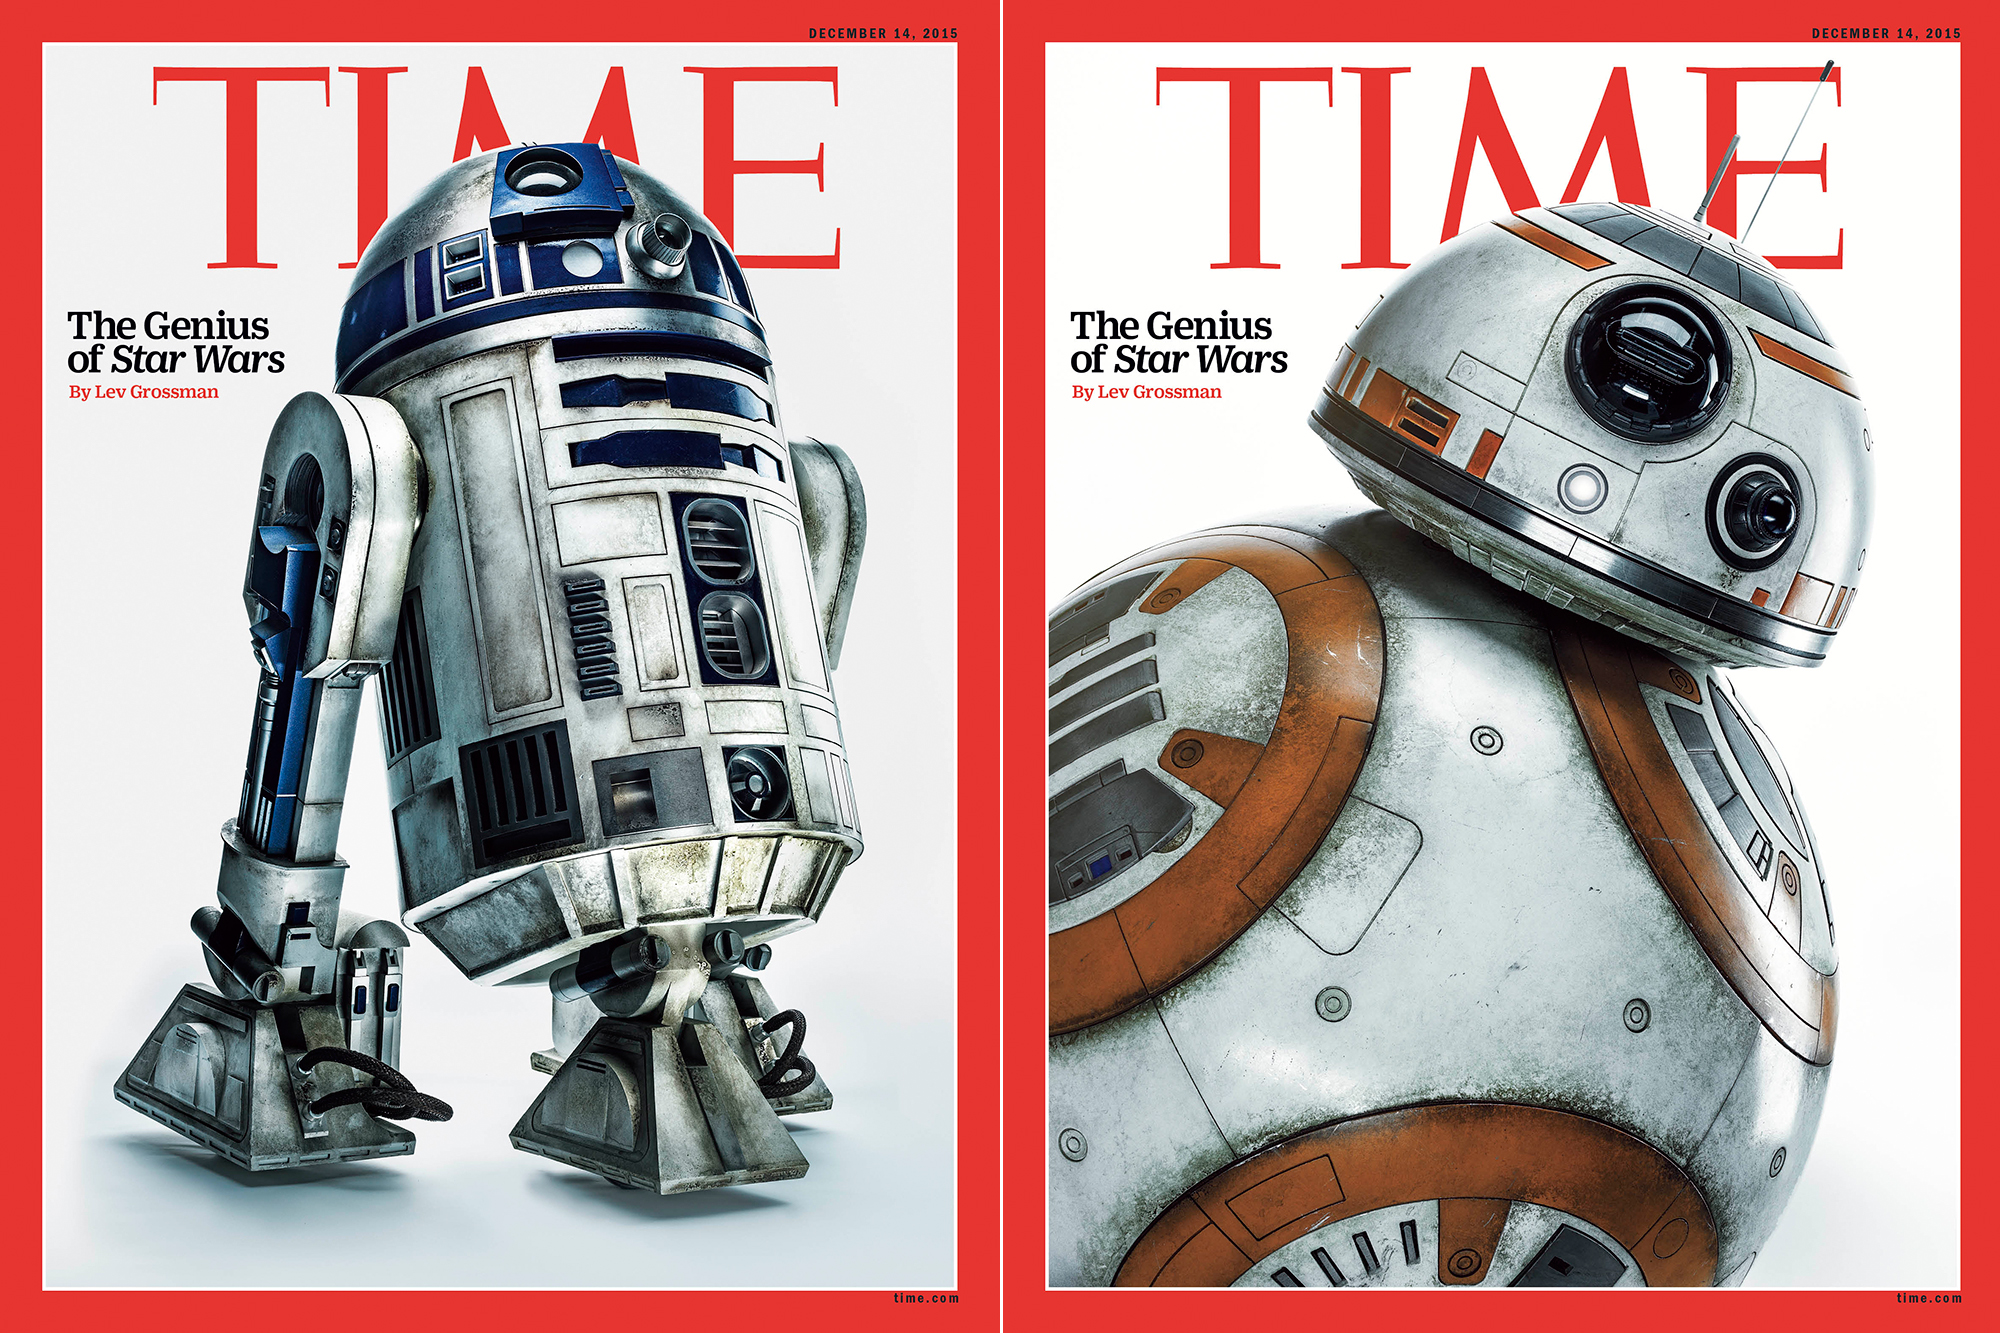 R2-D2 and BB-8 on the cover of the Dec. 14, 2015 issue of TIME.